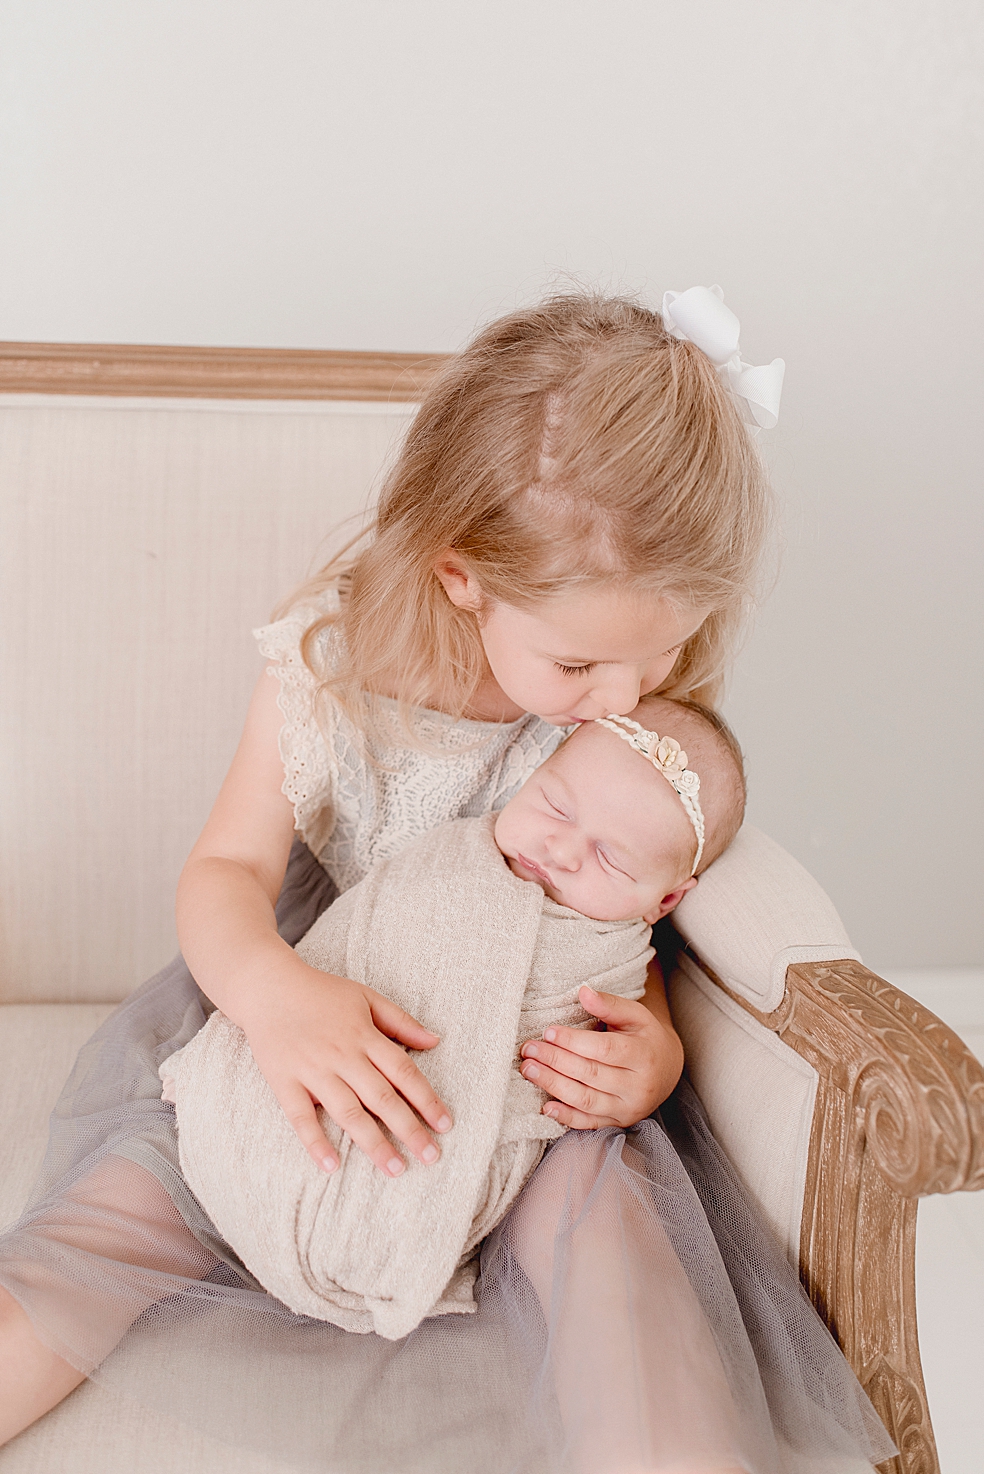 Big sister snuggling her newborn baby sister | Studio Newborn Session with Jessica Lee Photography